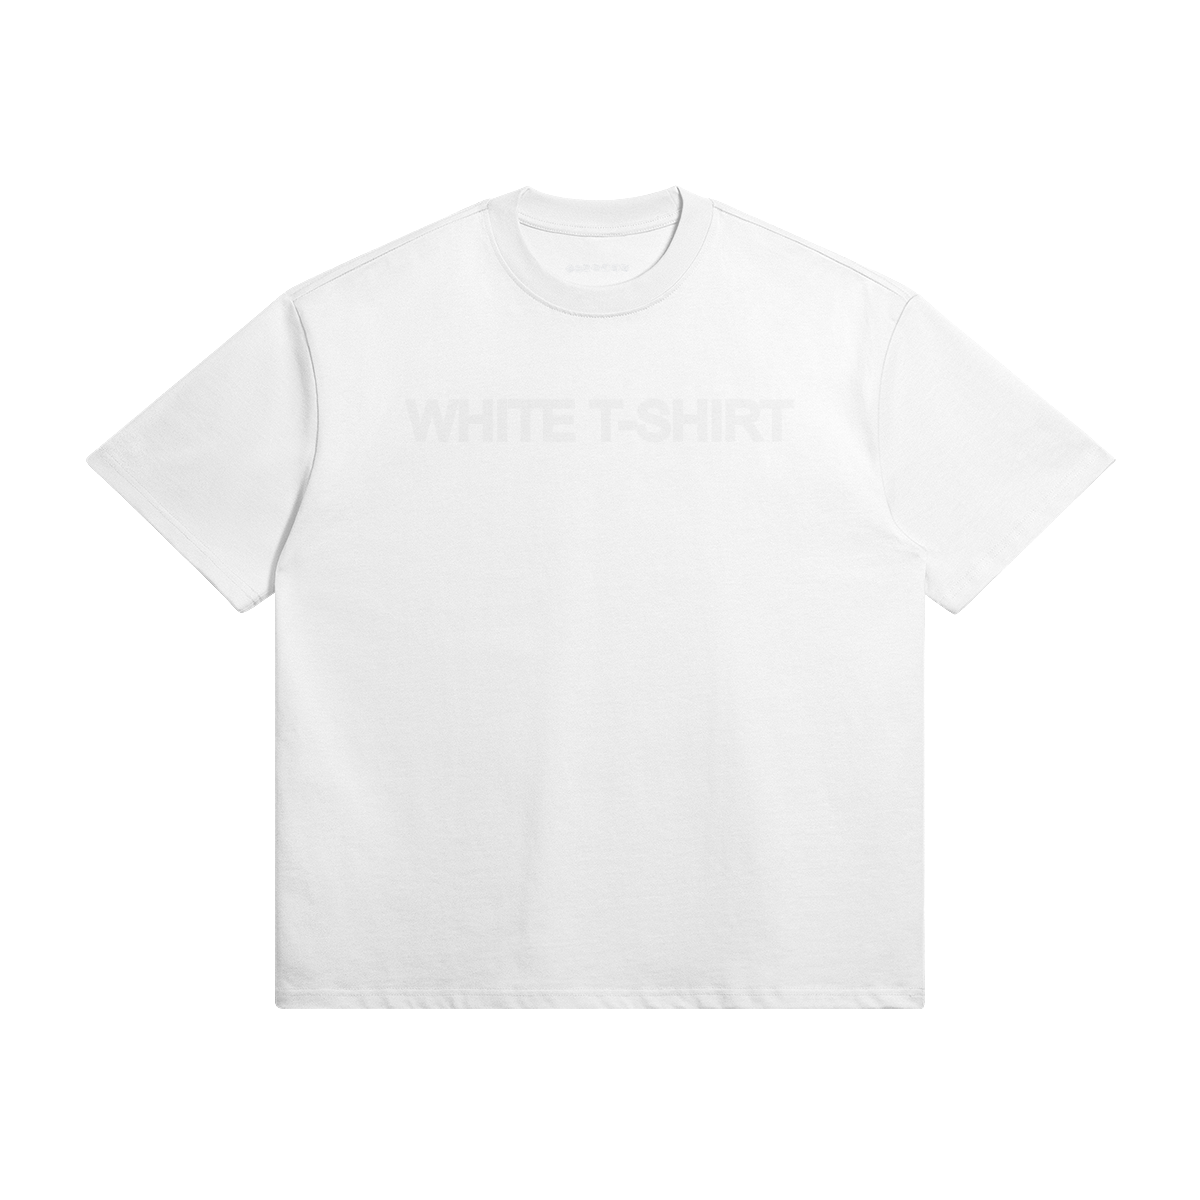 DAYCARE WHITE T-SHIRT